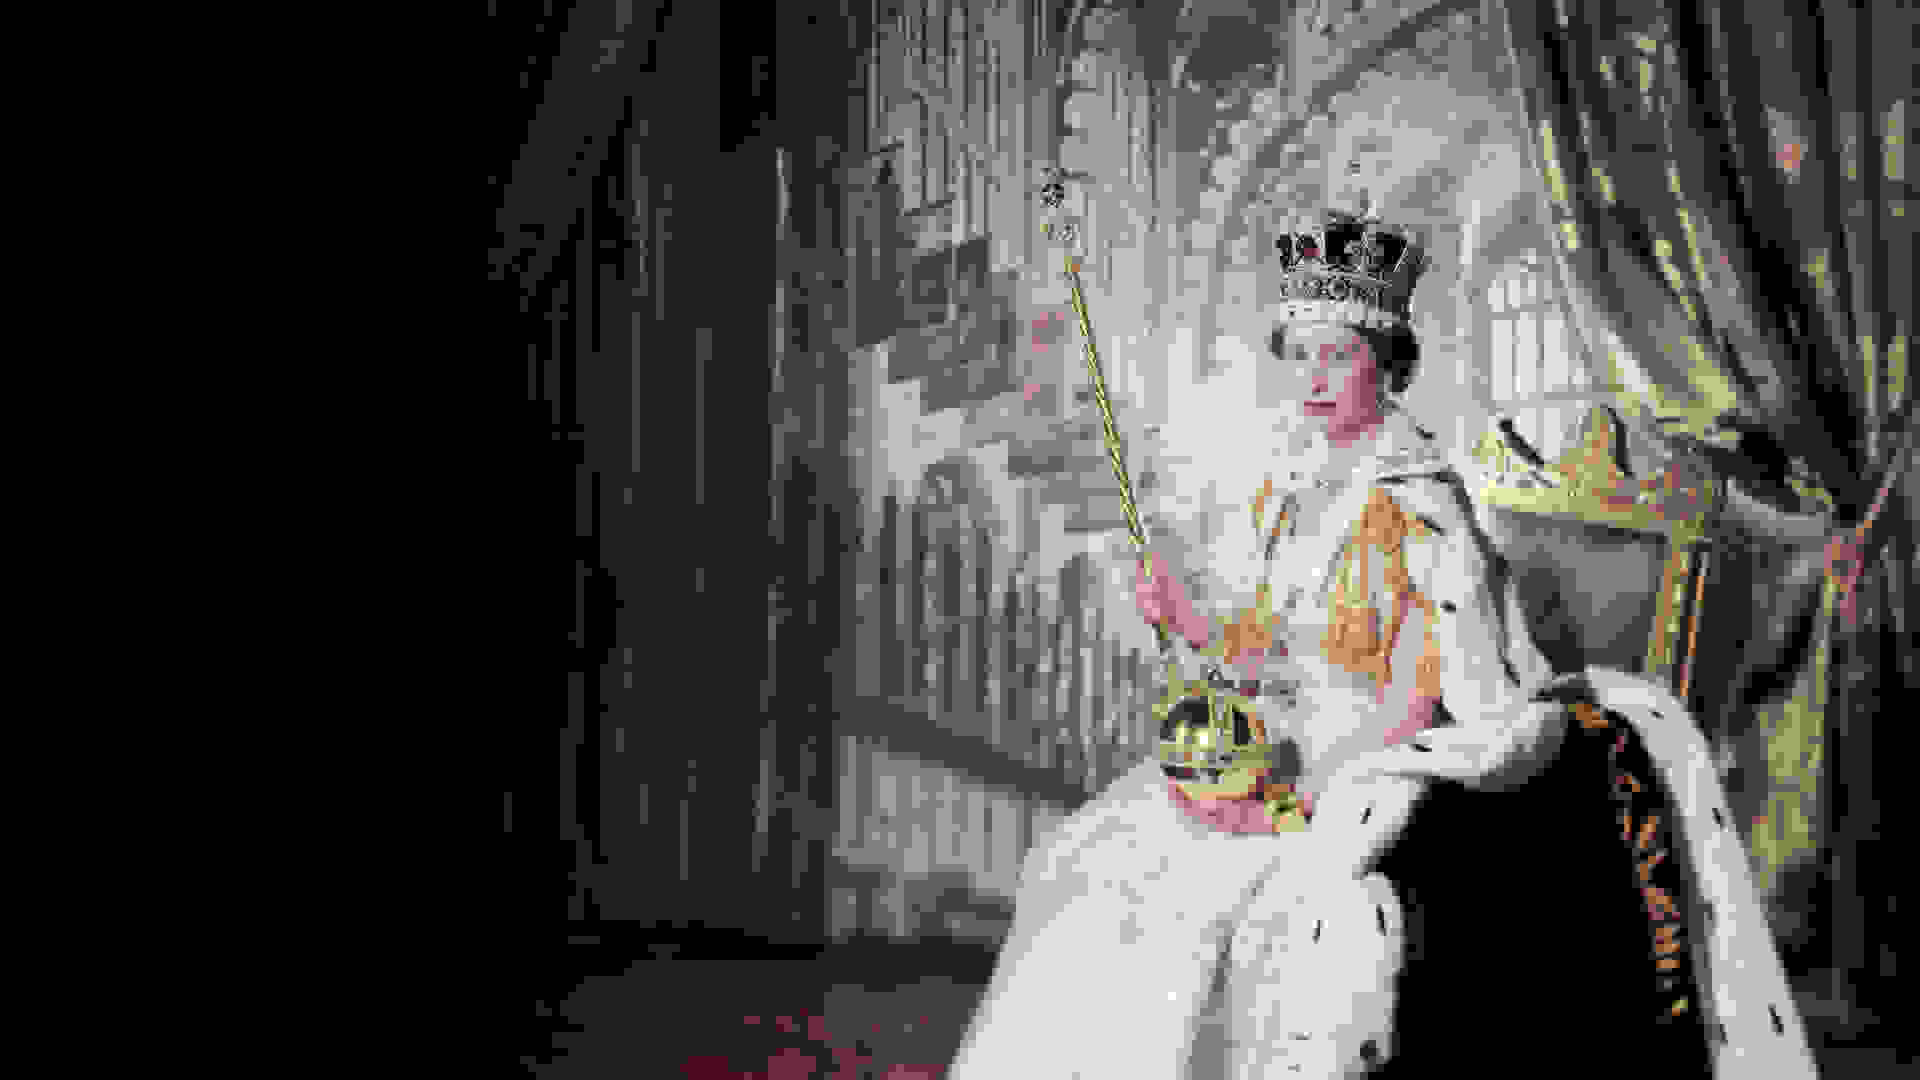 Color transparency of Queen Elizabeth II on her Coronation Day, 2 June 1953, by Cecil Beaton. Royal Collection Trust / ©Her Majesty Queen Elizabeth II 2022